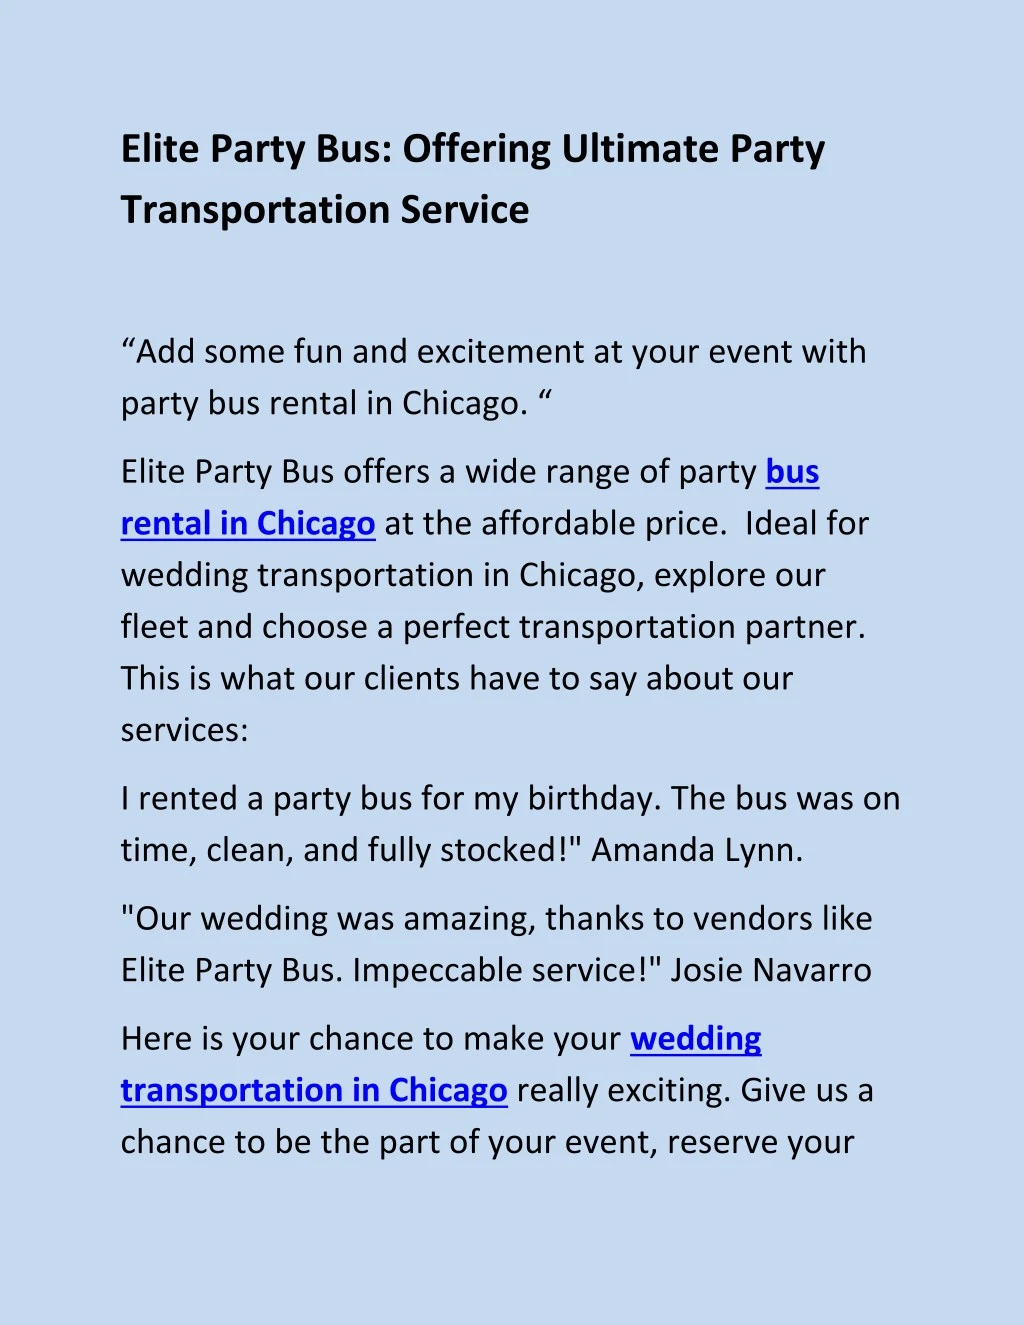 elite party bus offering ultimate party